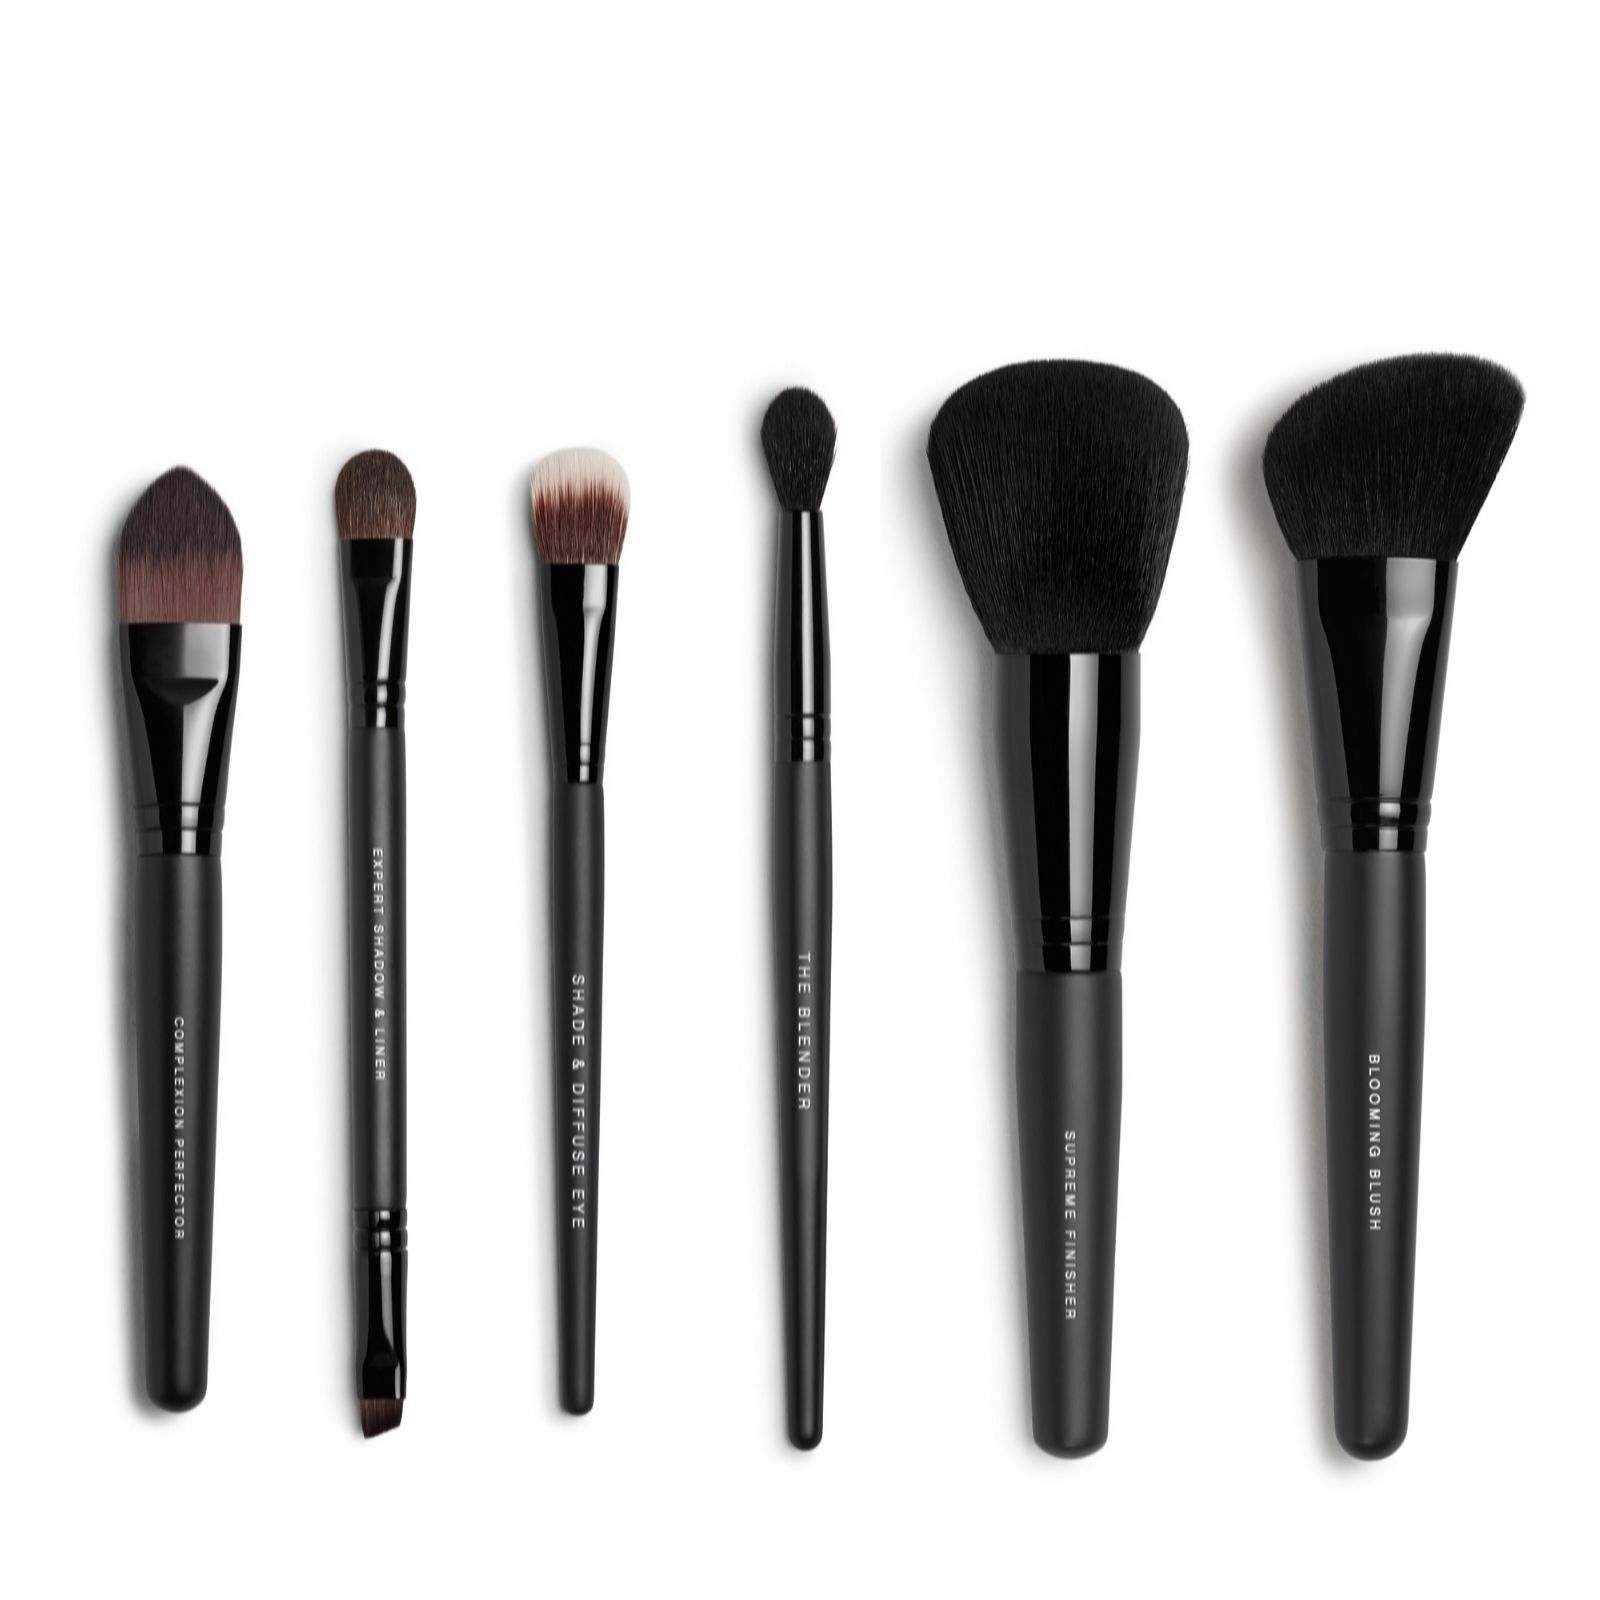 Bareminerals Deluxe Brush Collection - QVC UK